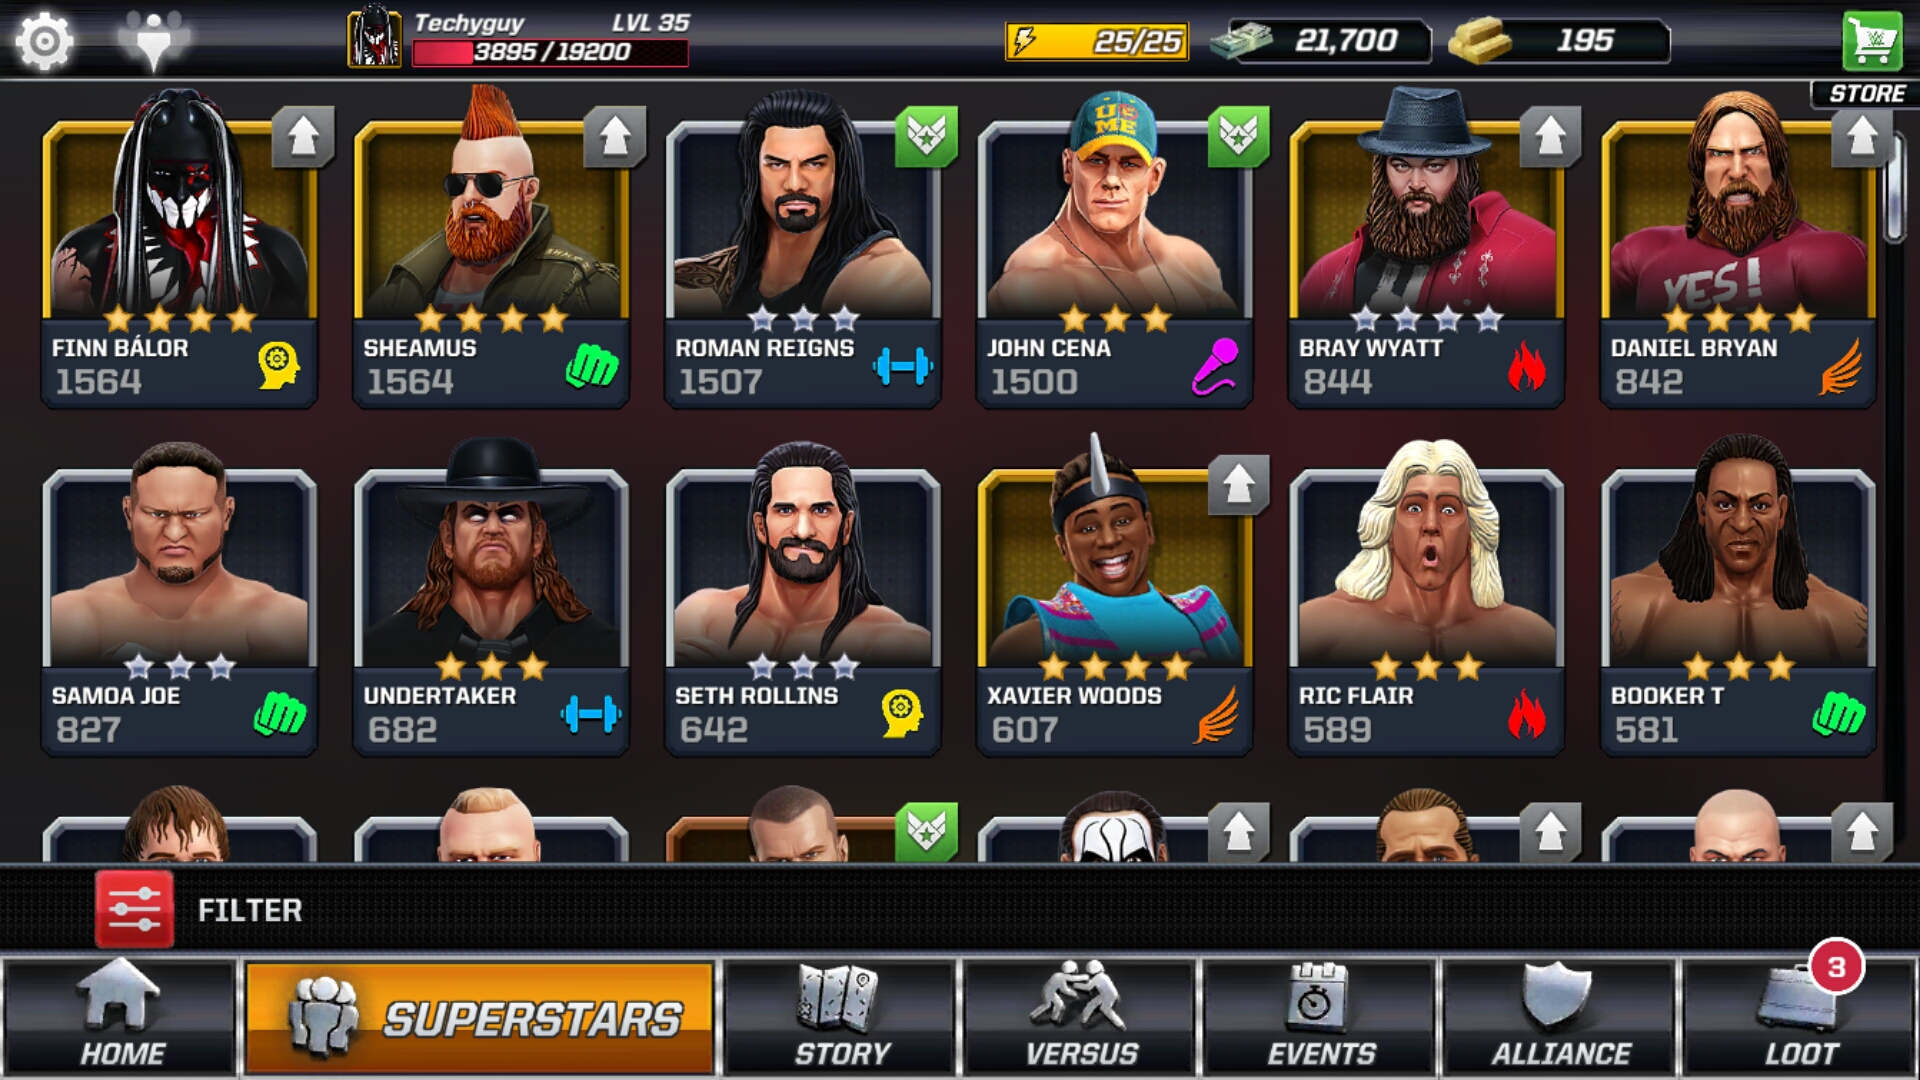 I think i am the worst player in the wwe mayhem, I have